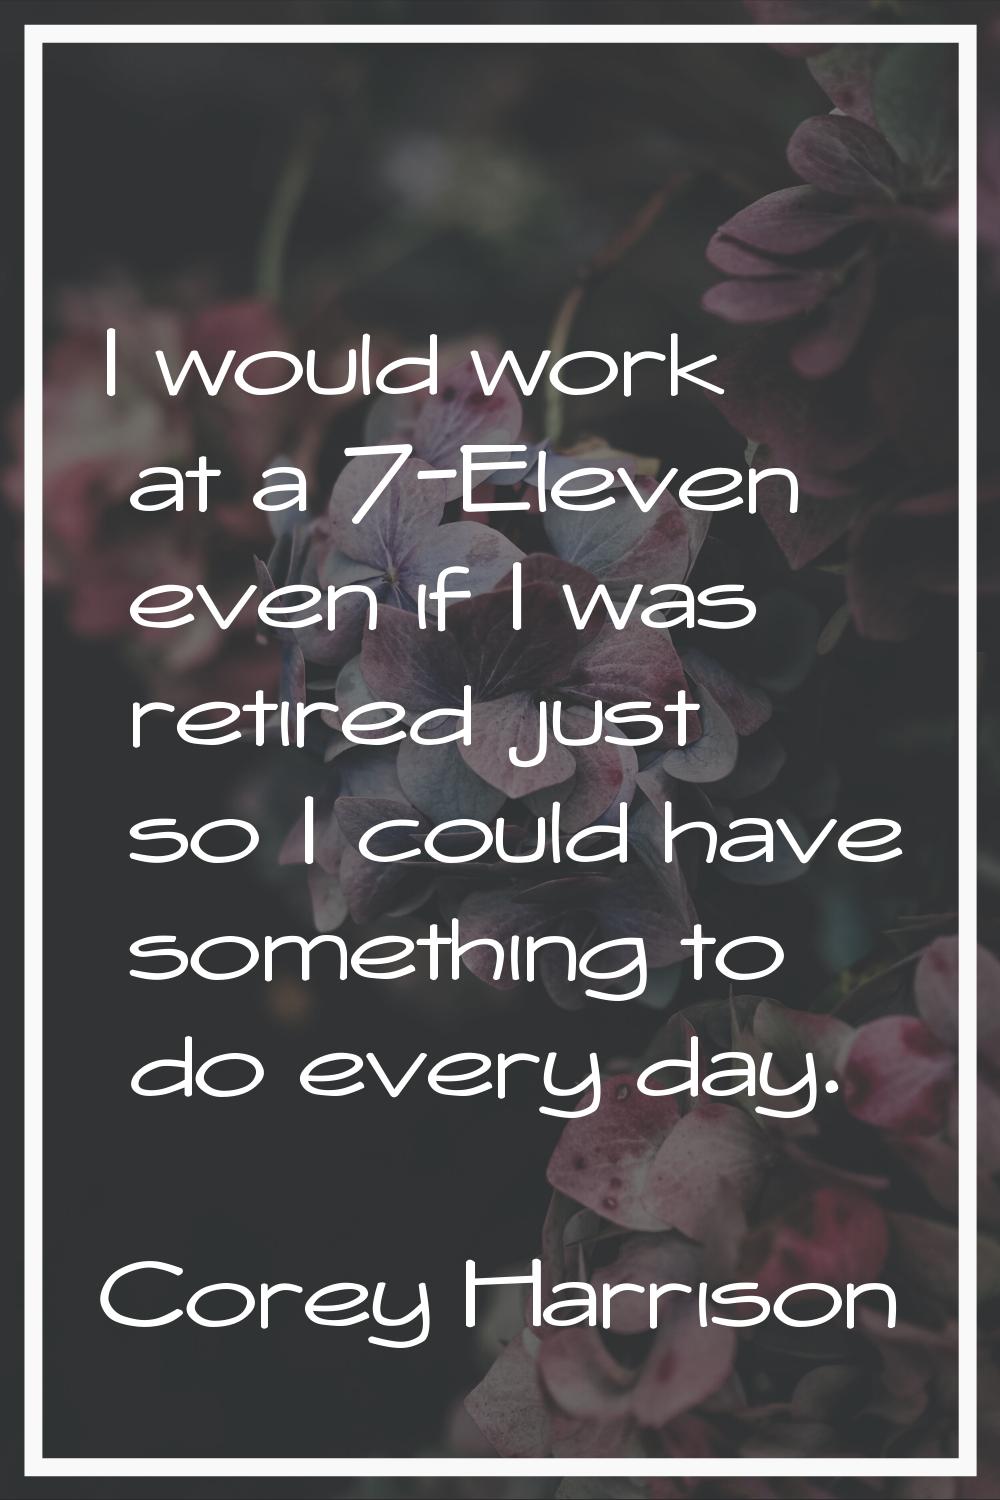 I would work at a 7-Eleven even if I was retired just so I could have something to do every day.